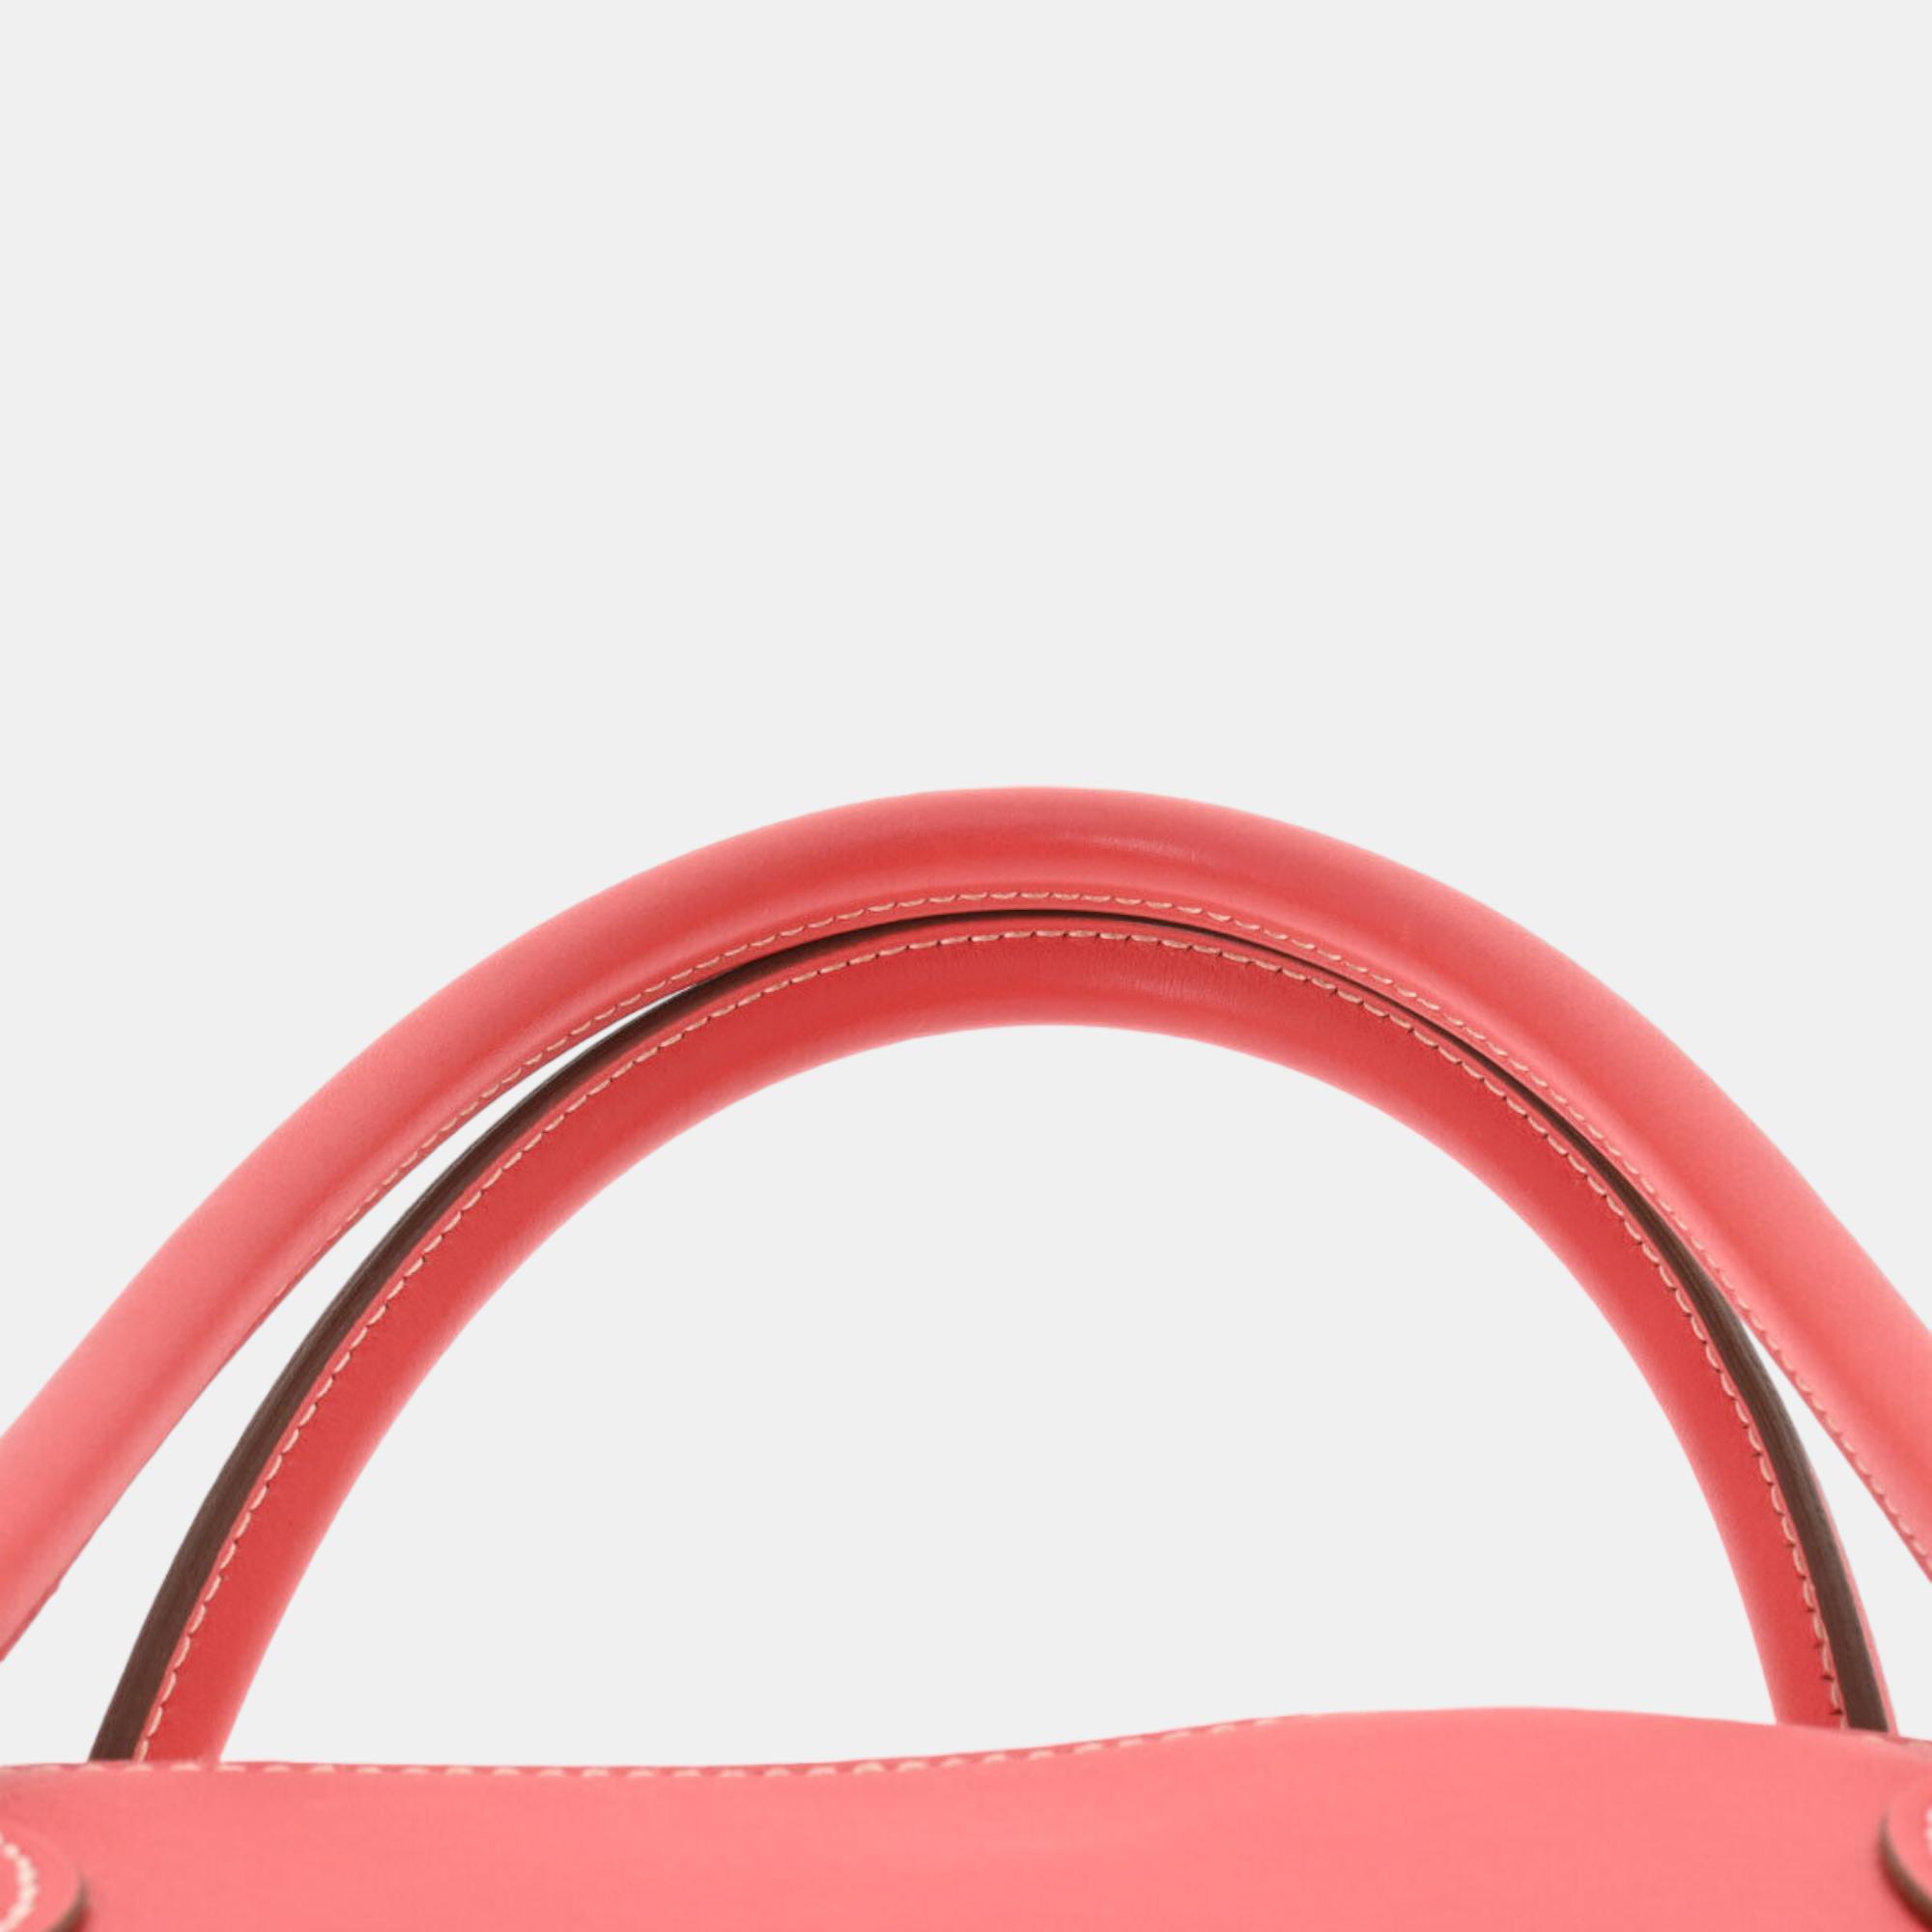 Hermes Pink Leather Sikkim Relax Bolide 35 Satchel Bag